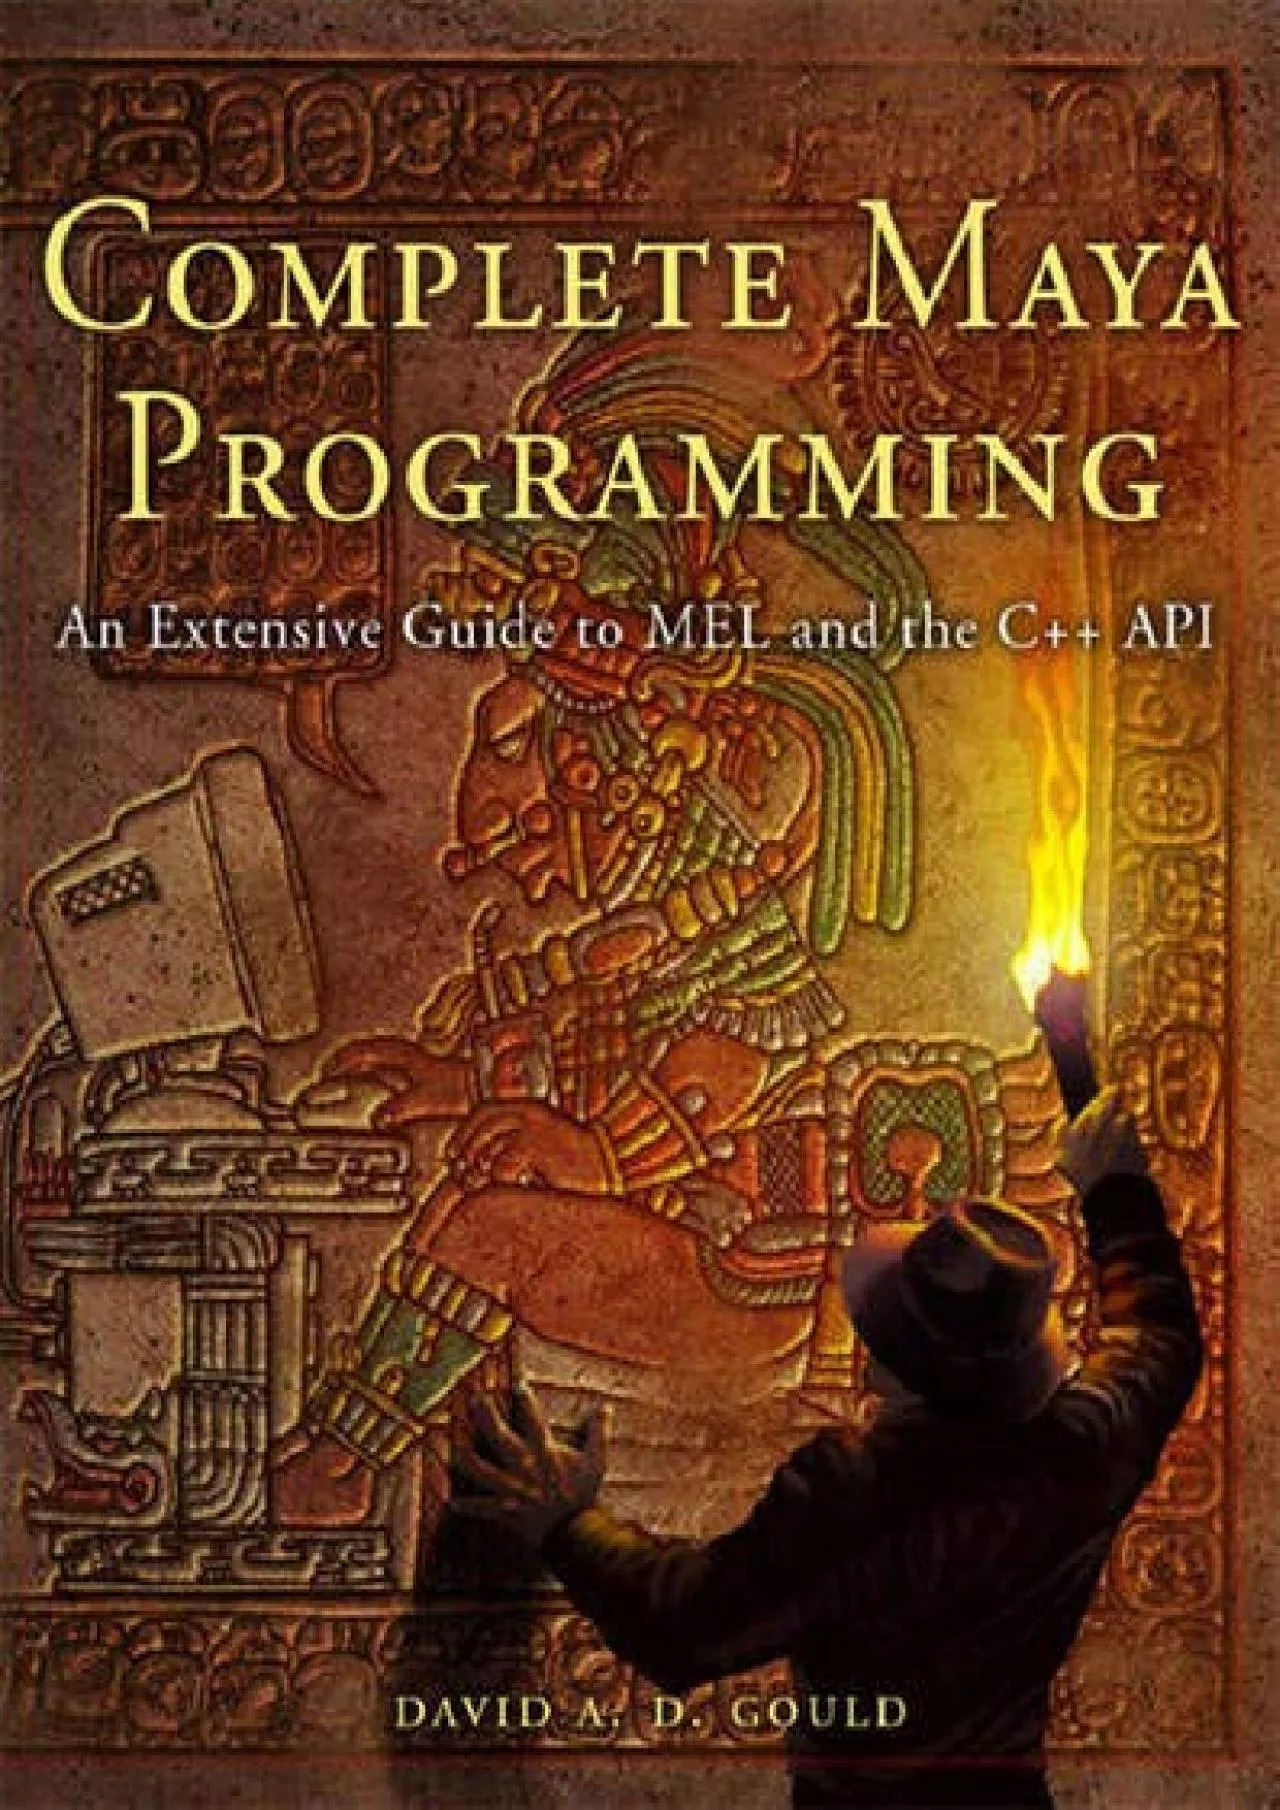 (EBOOK)-Complete Maya Programming: An Extensive Guide to MEL and C++ API (The Morgan Kaufmann